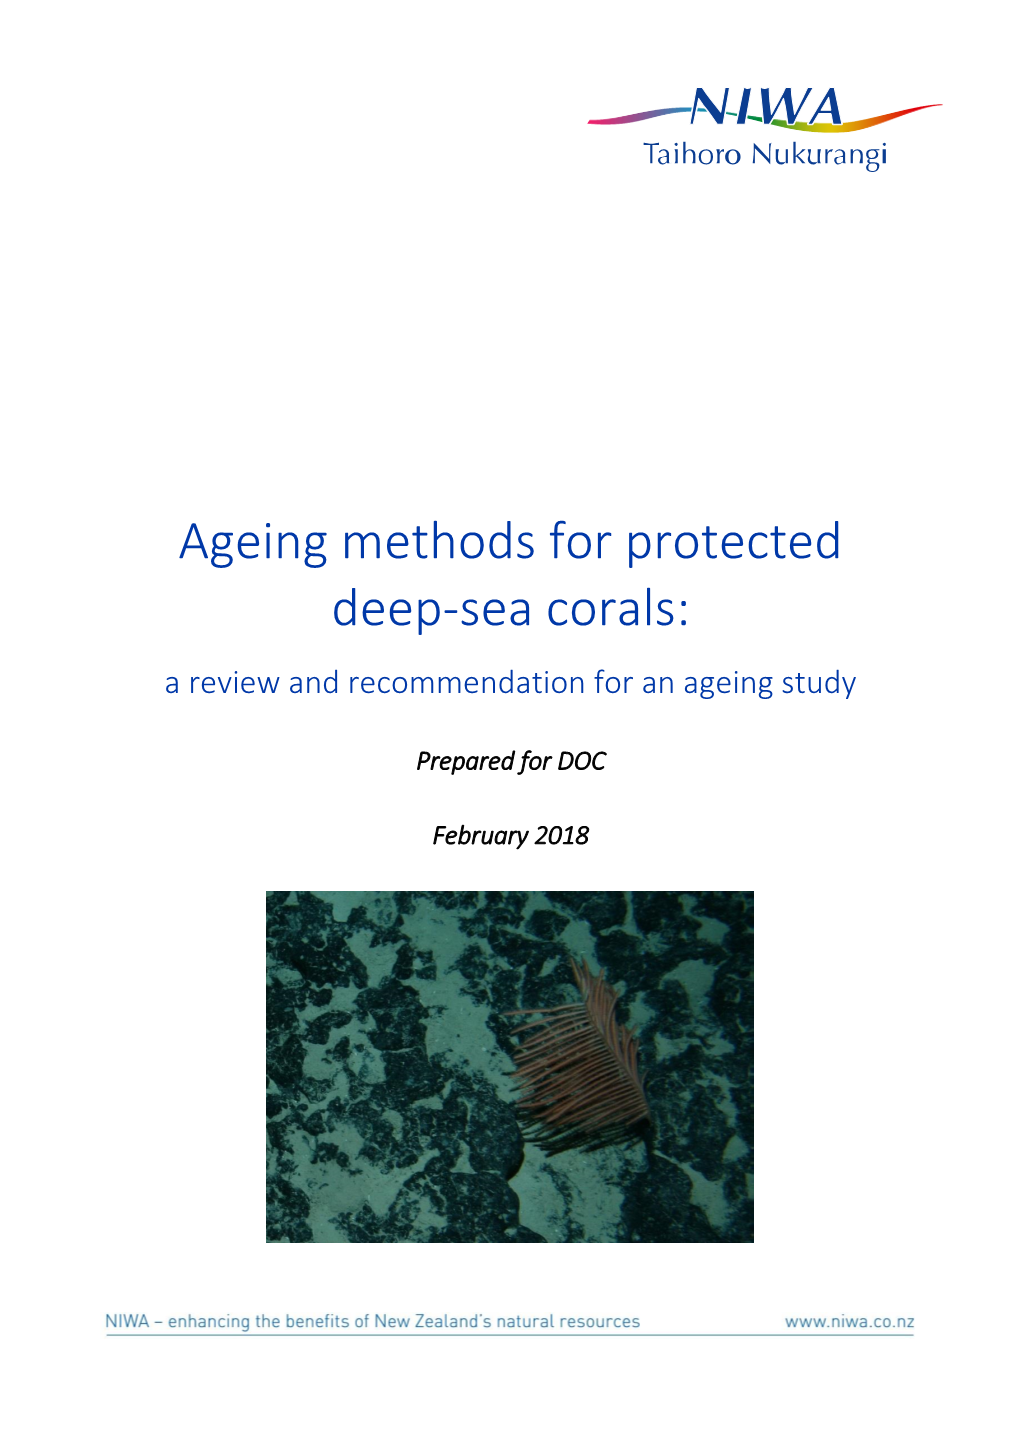 Ageing Methods for Protected Deep-Sea Corals: a Review and Recommendation for an Ageing Study